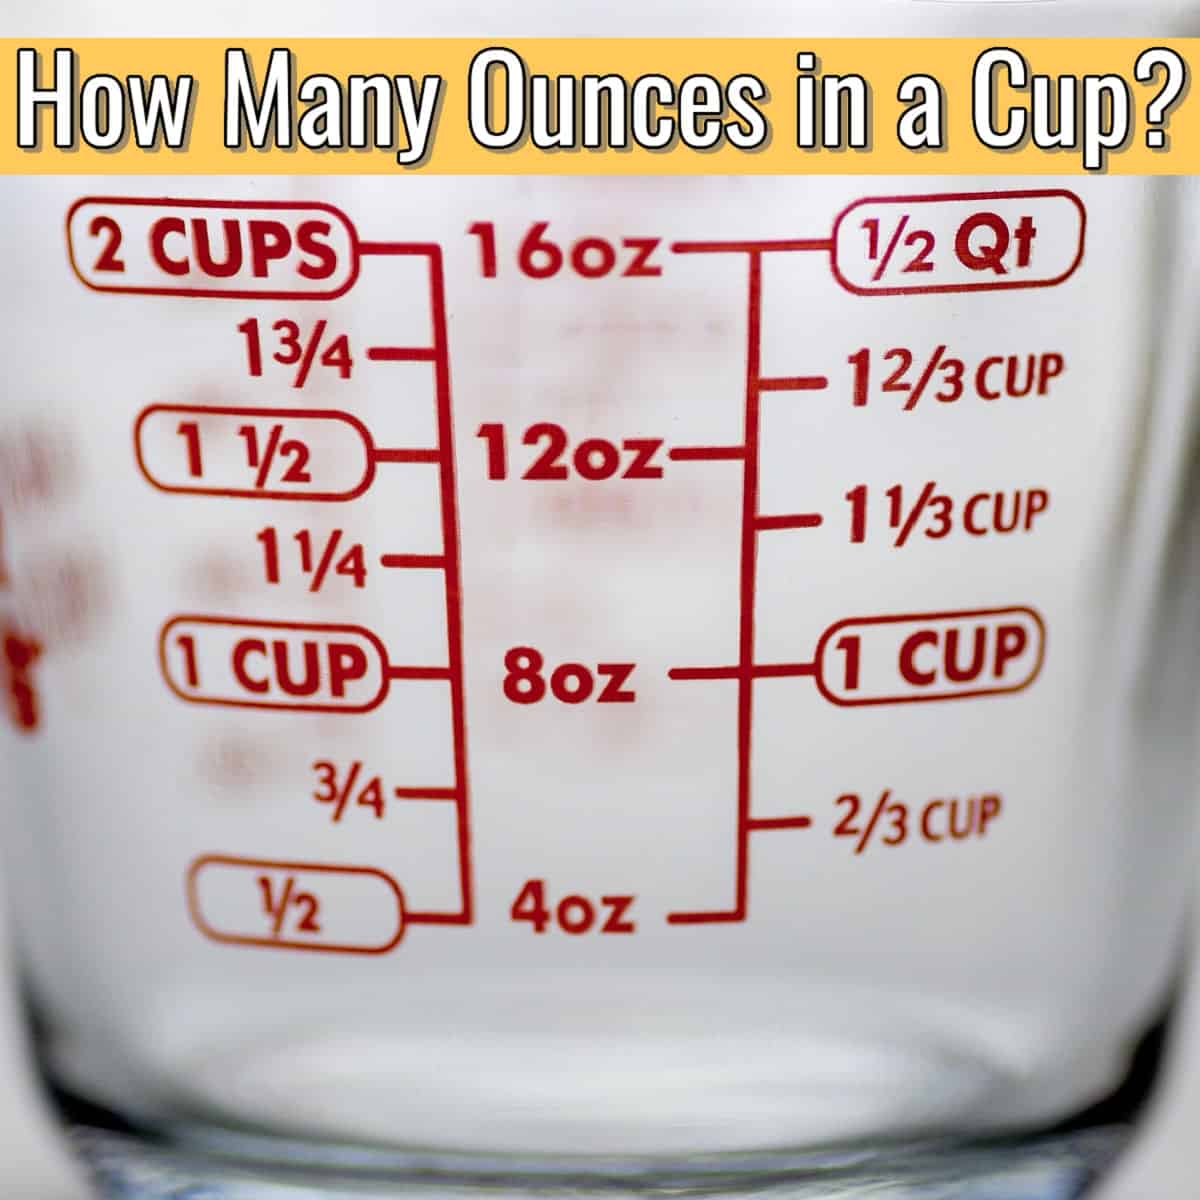 measuring cup with text "how many ounces in a cup?"